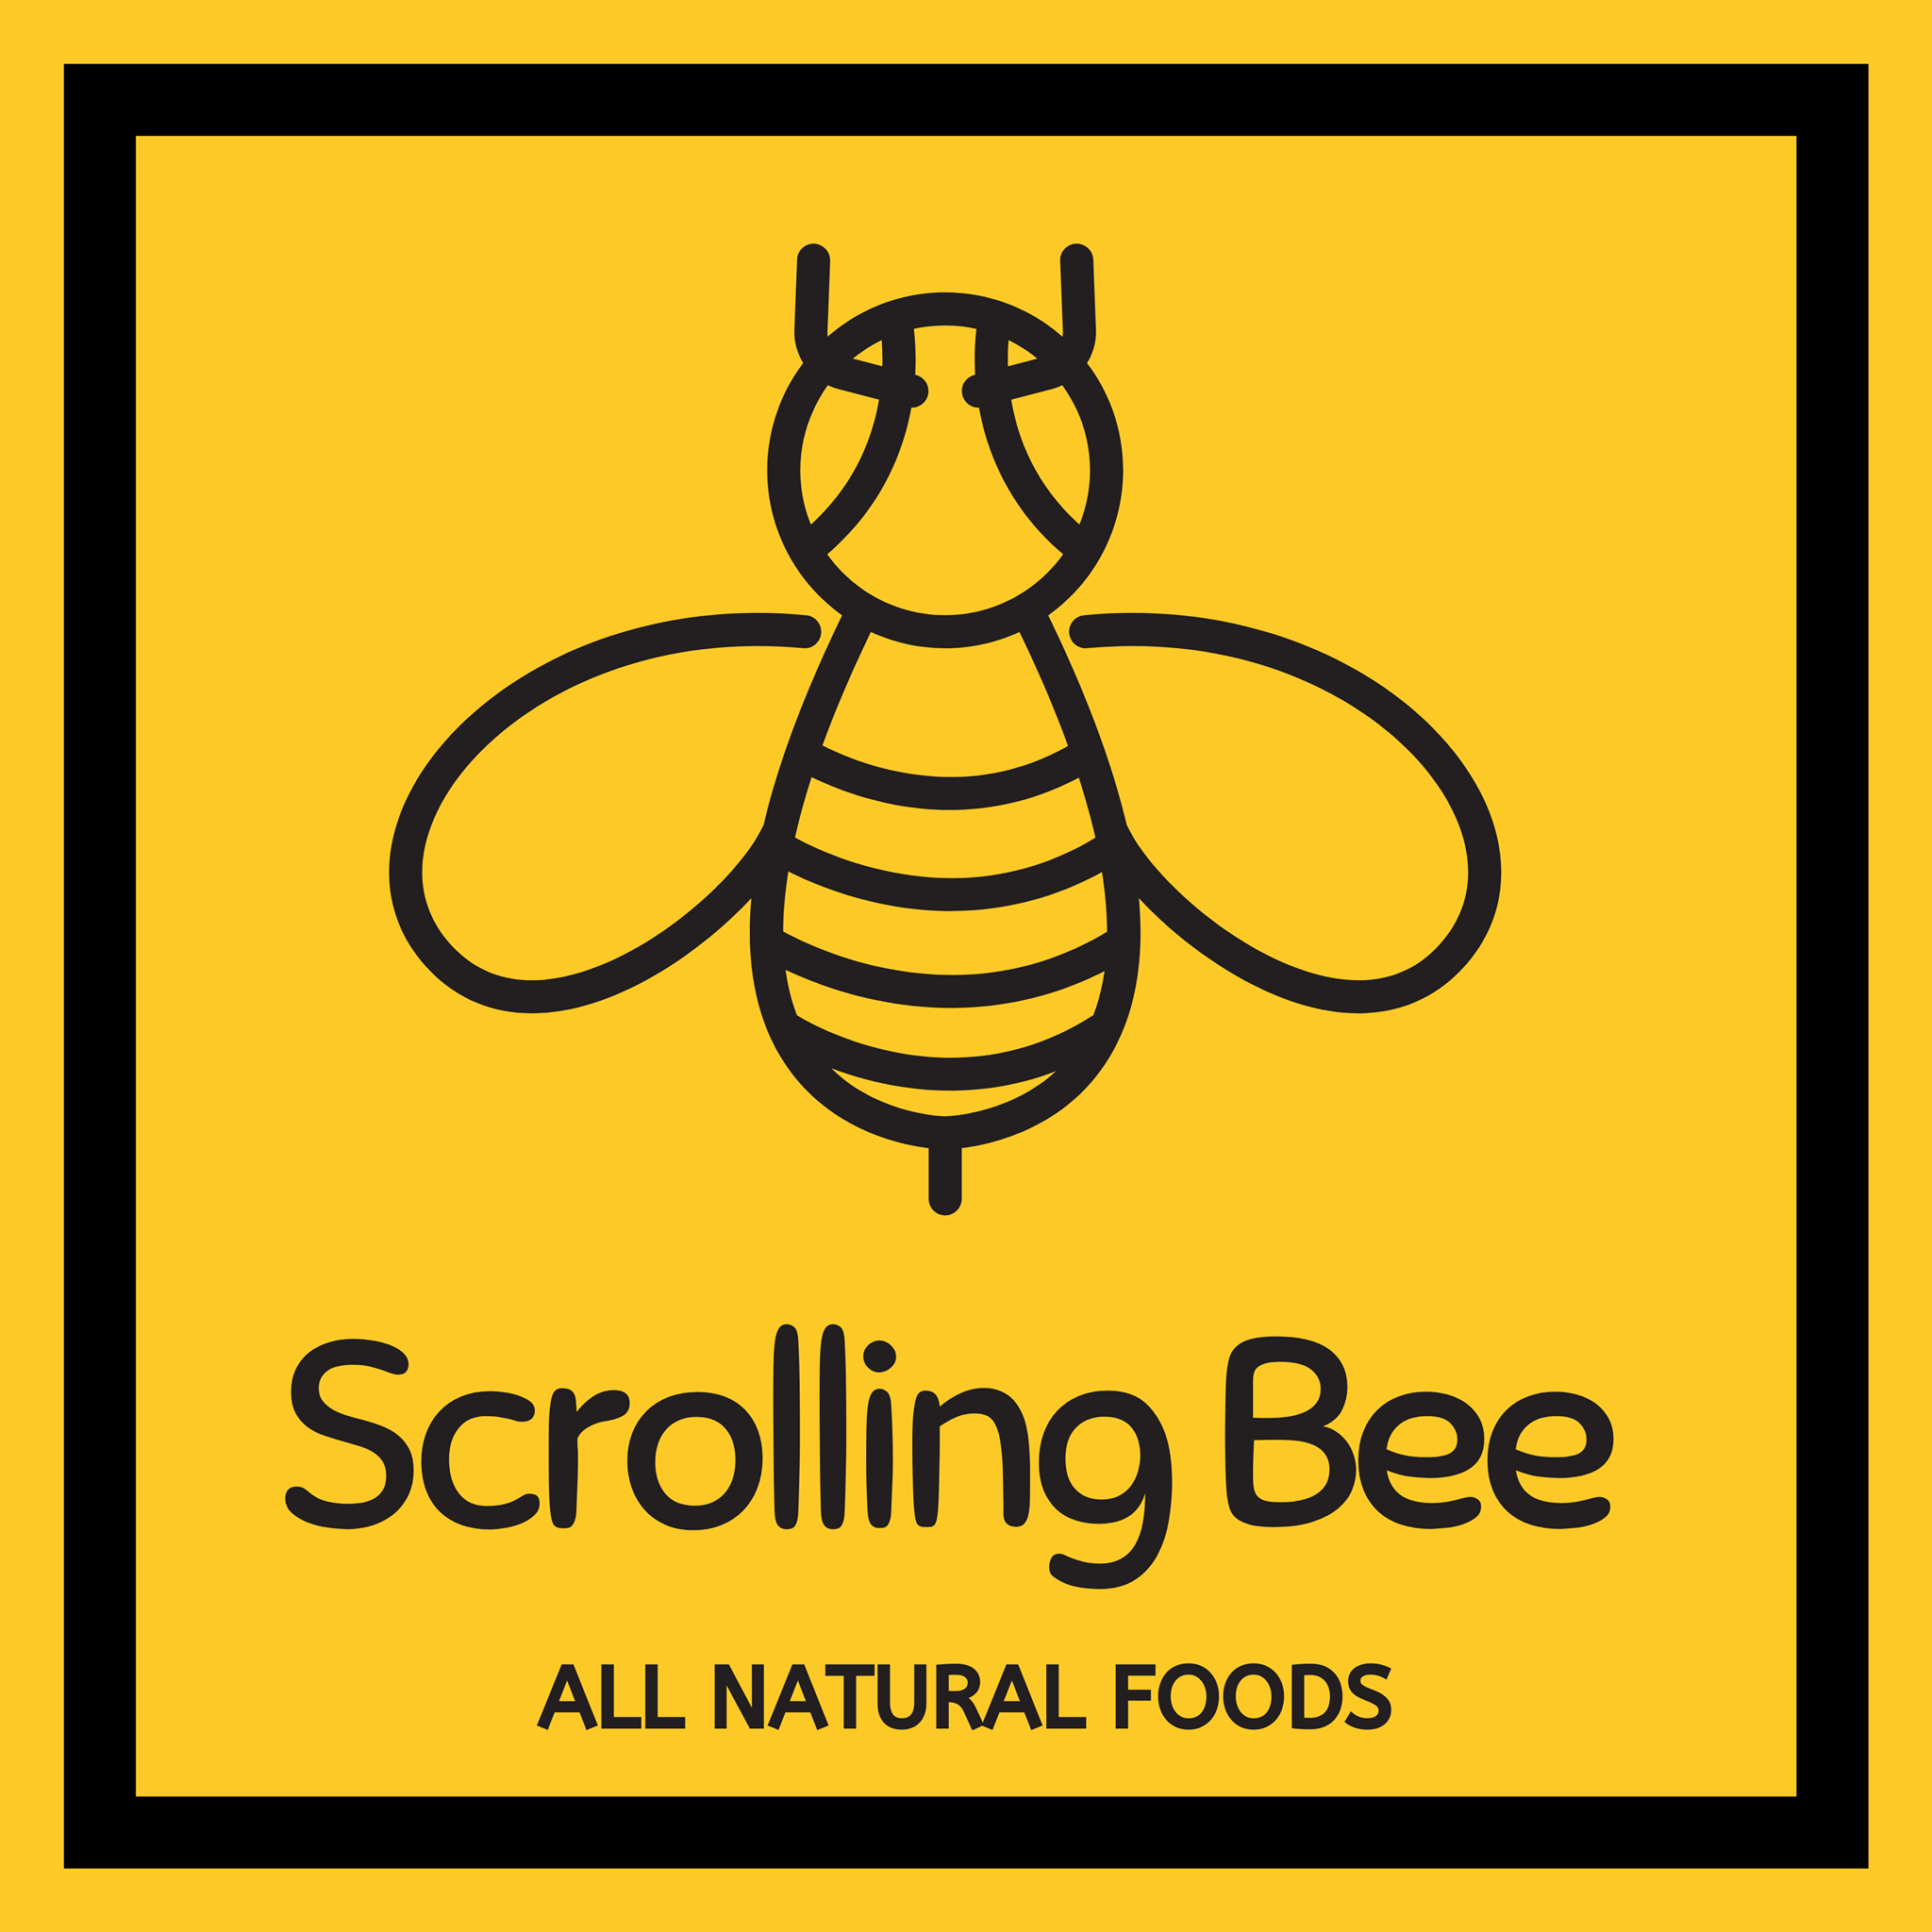 Scrolling Bees